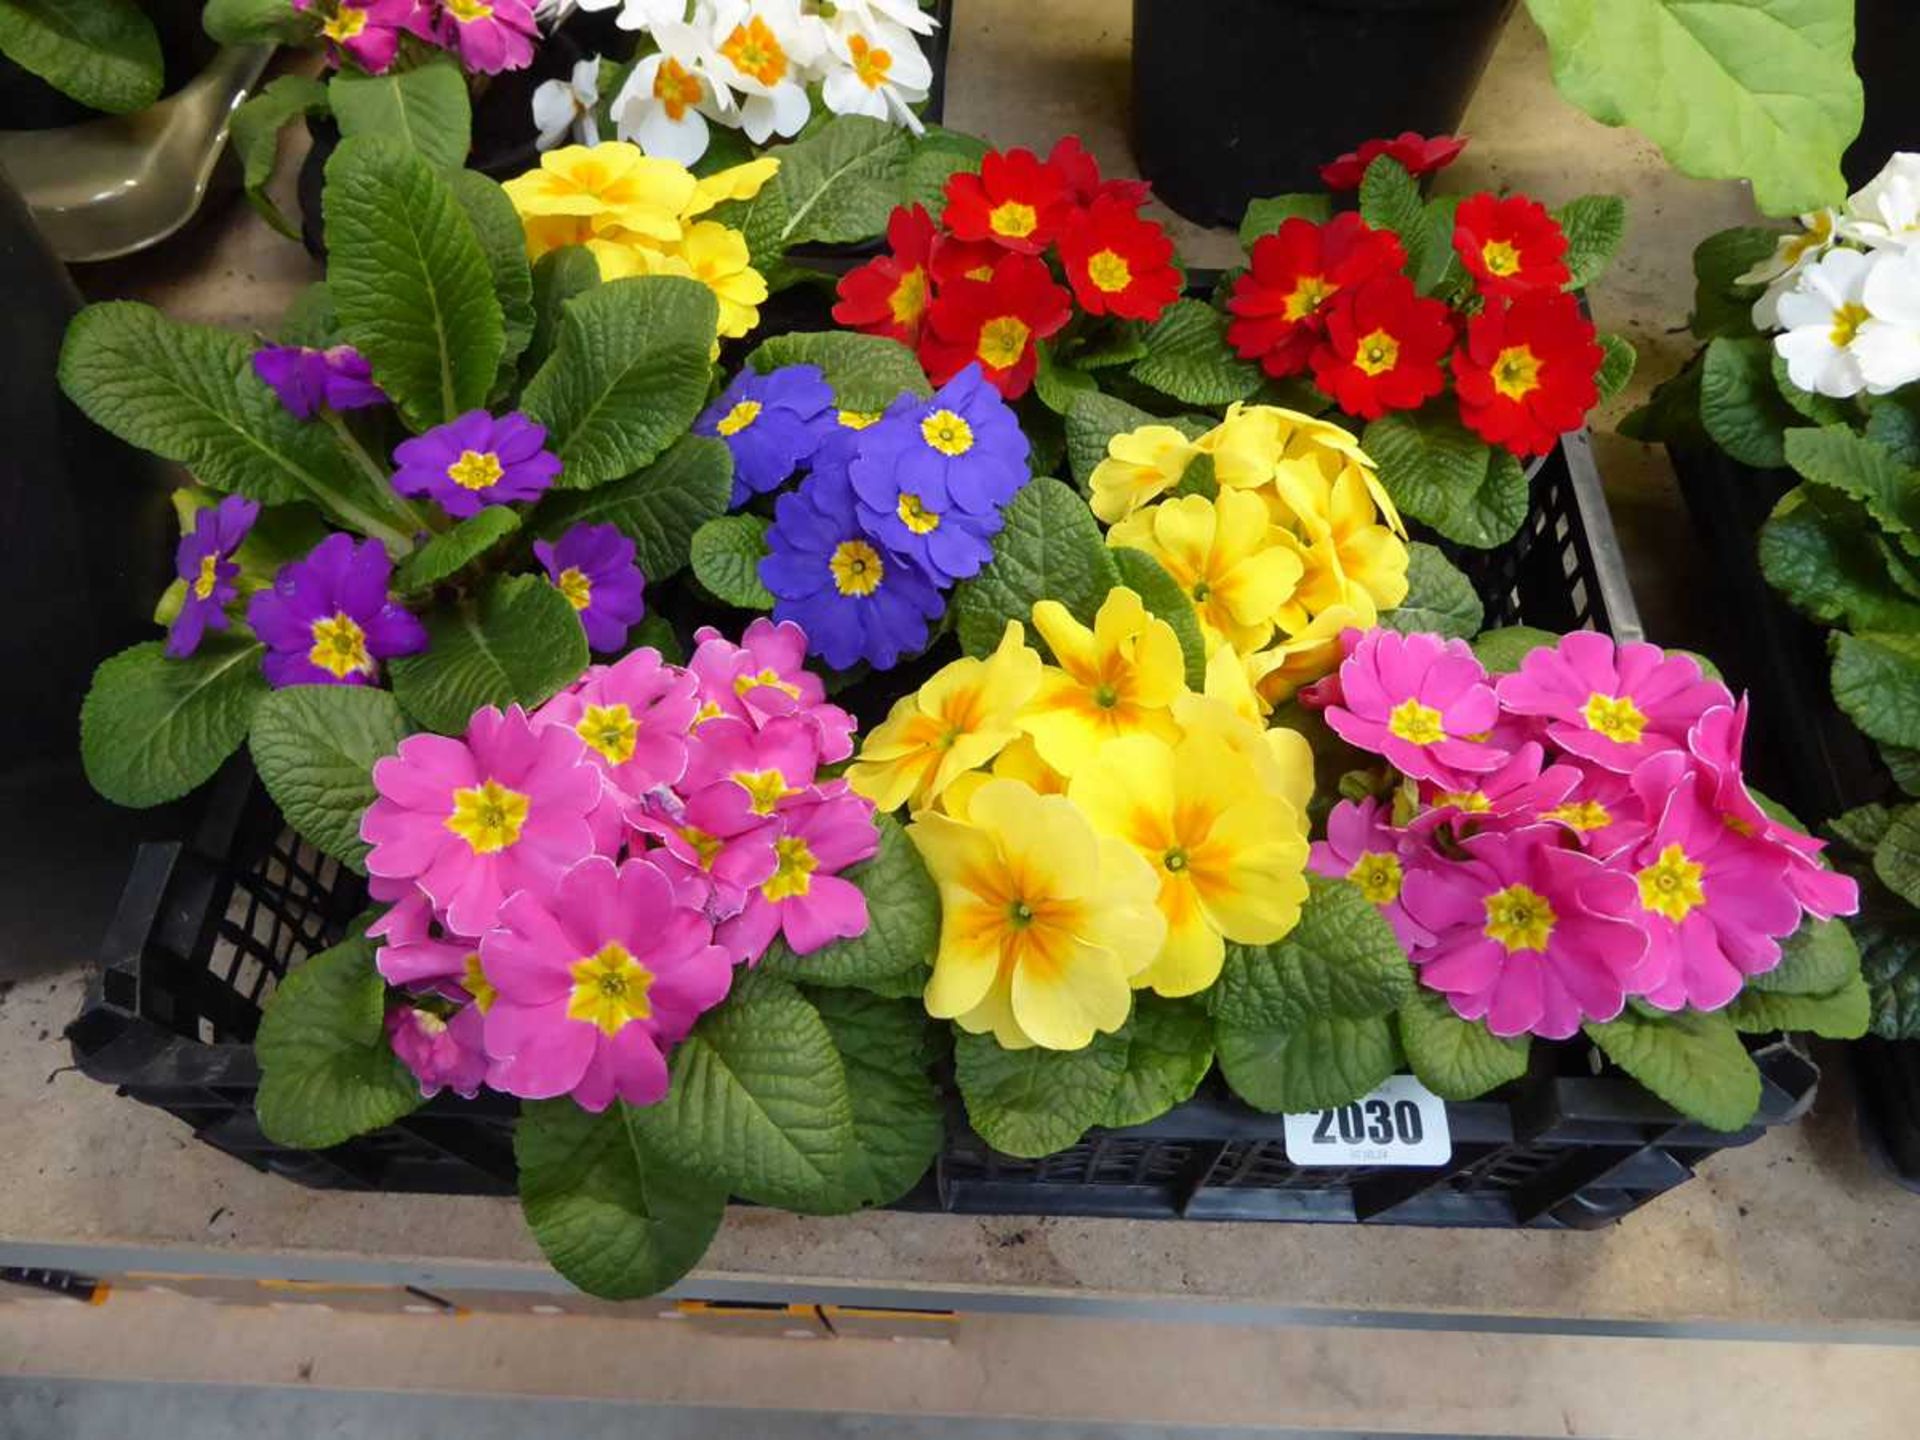 Tray containing 8 pots of primroses